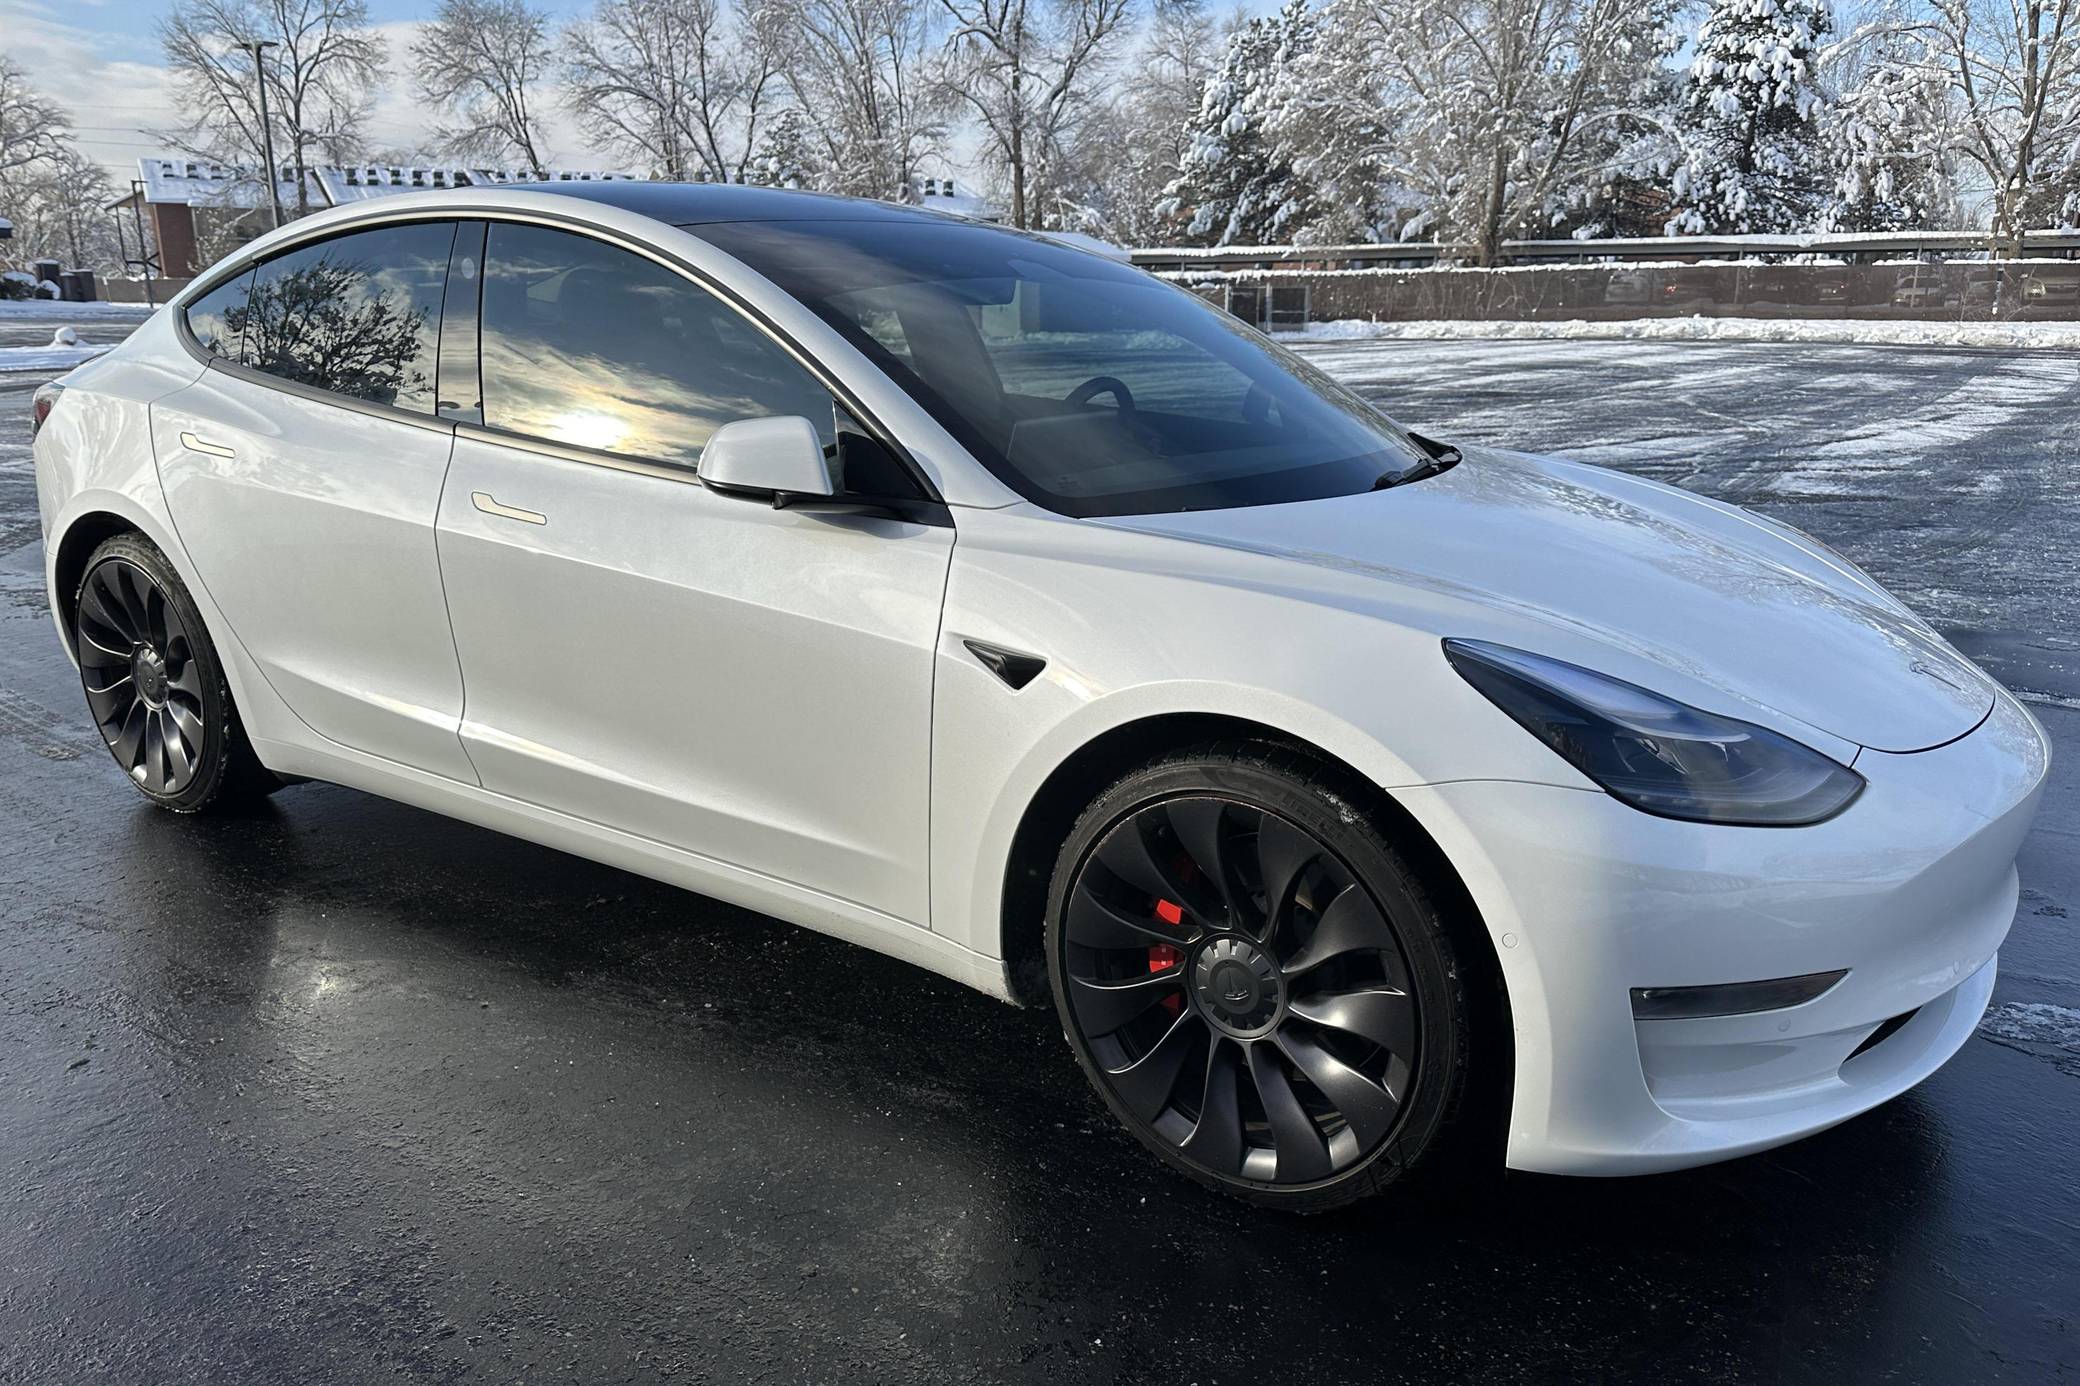 New--Tesla Model 3 Grille- 18 - Temple Performance Cars